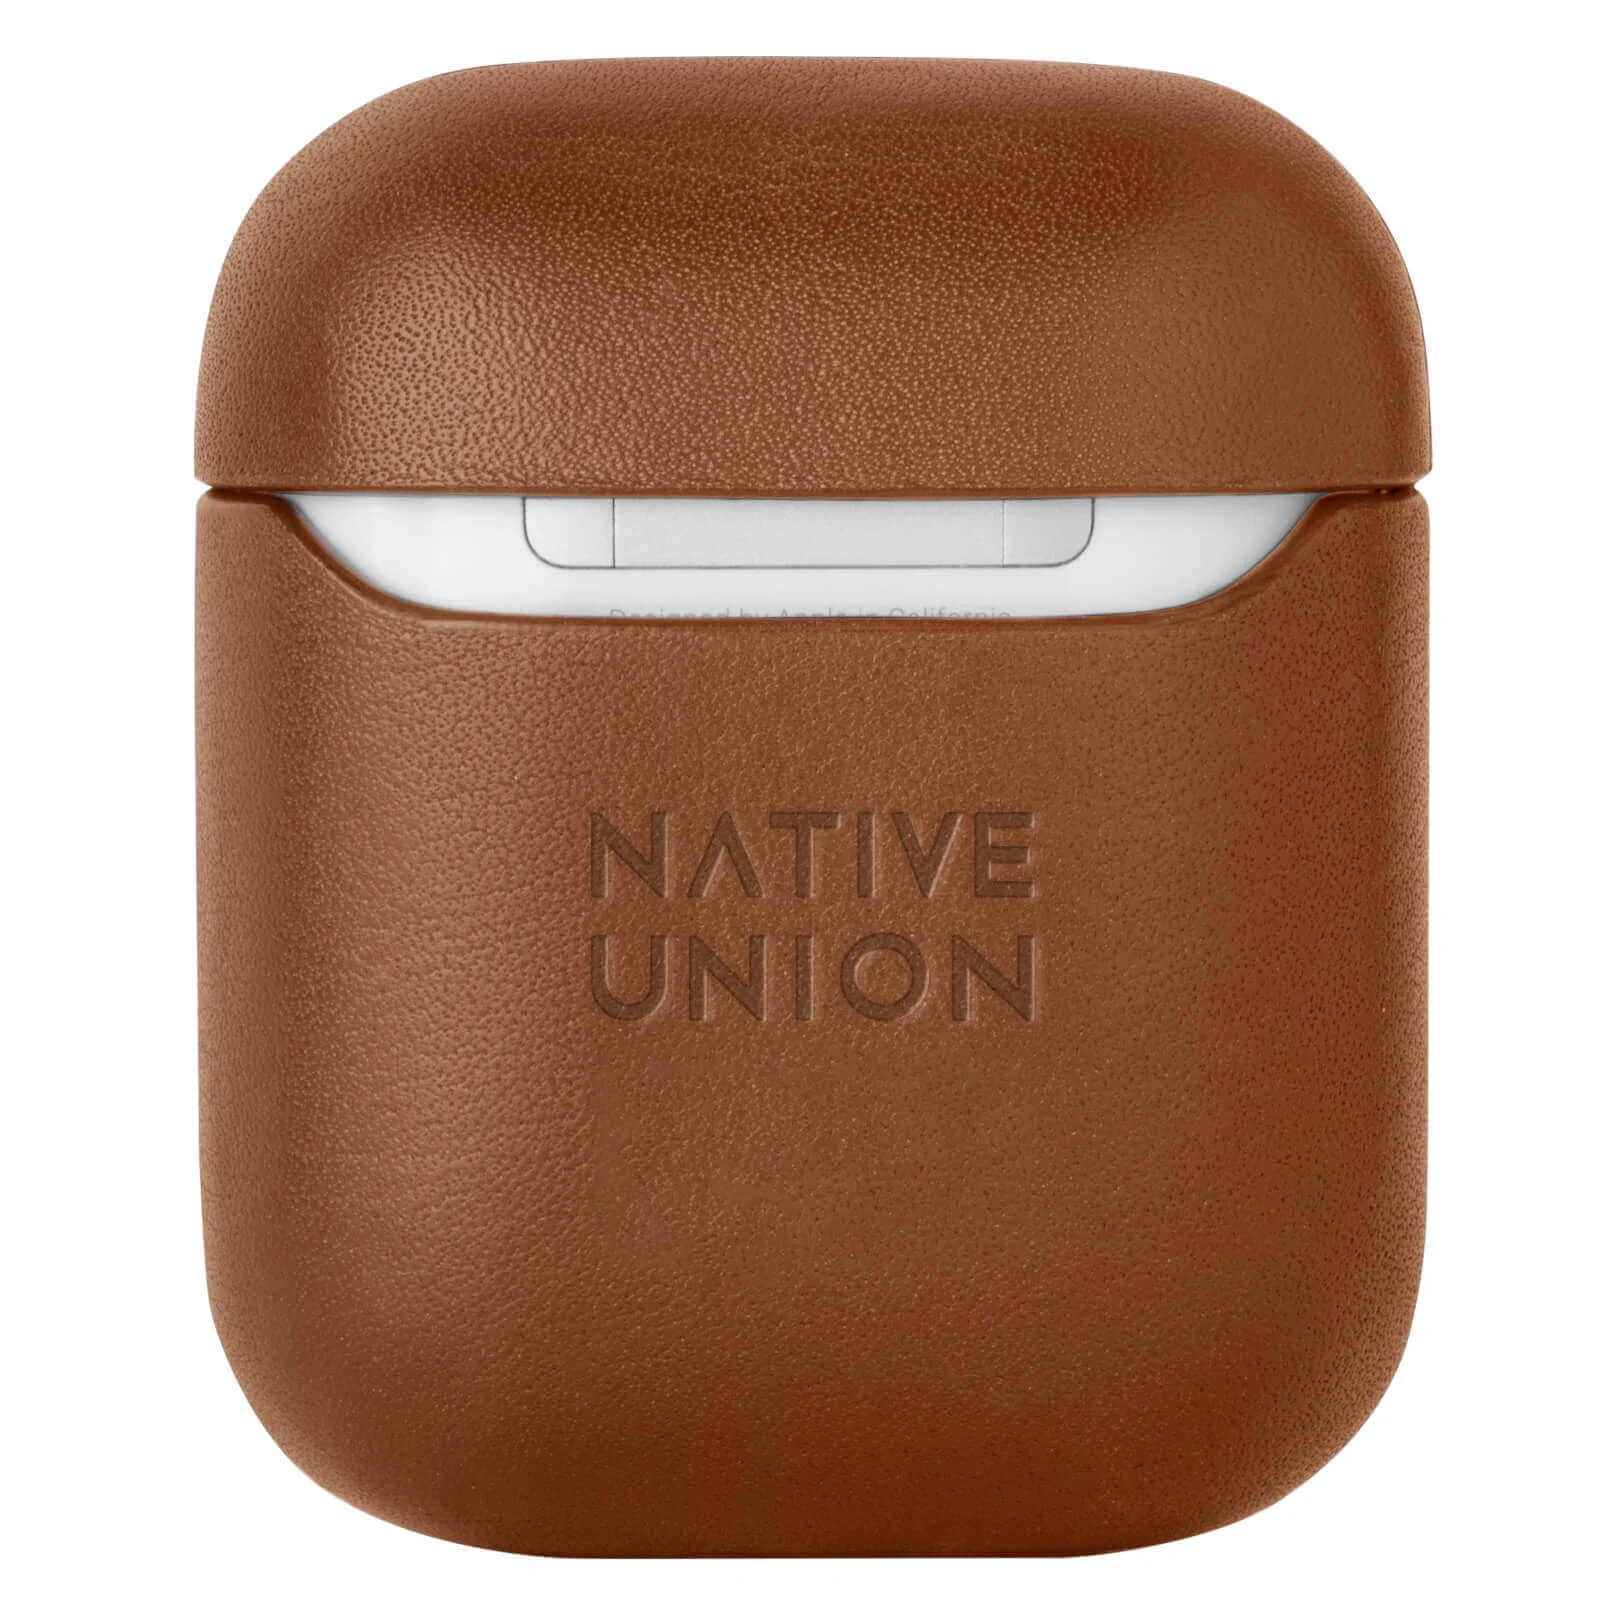 Native Union Classic Leather Airpods Case - Tan Image 1